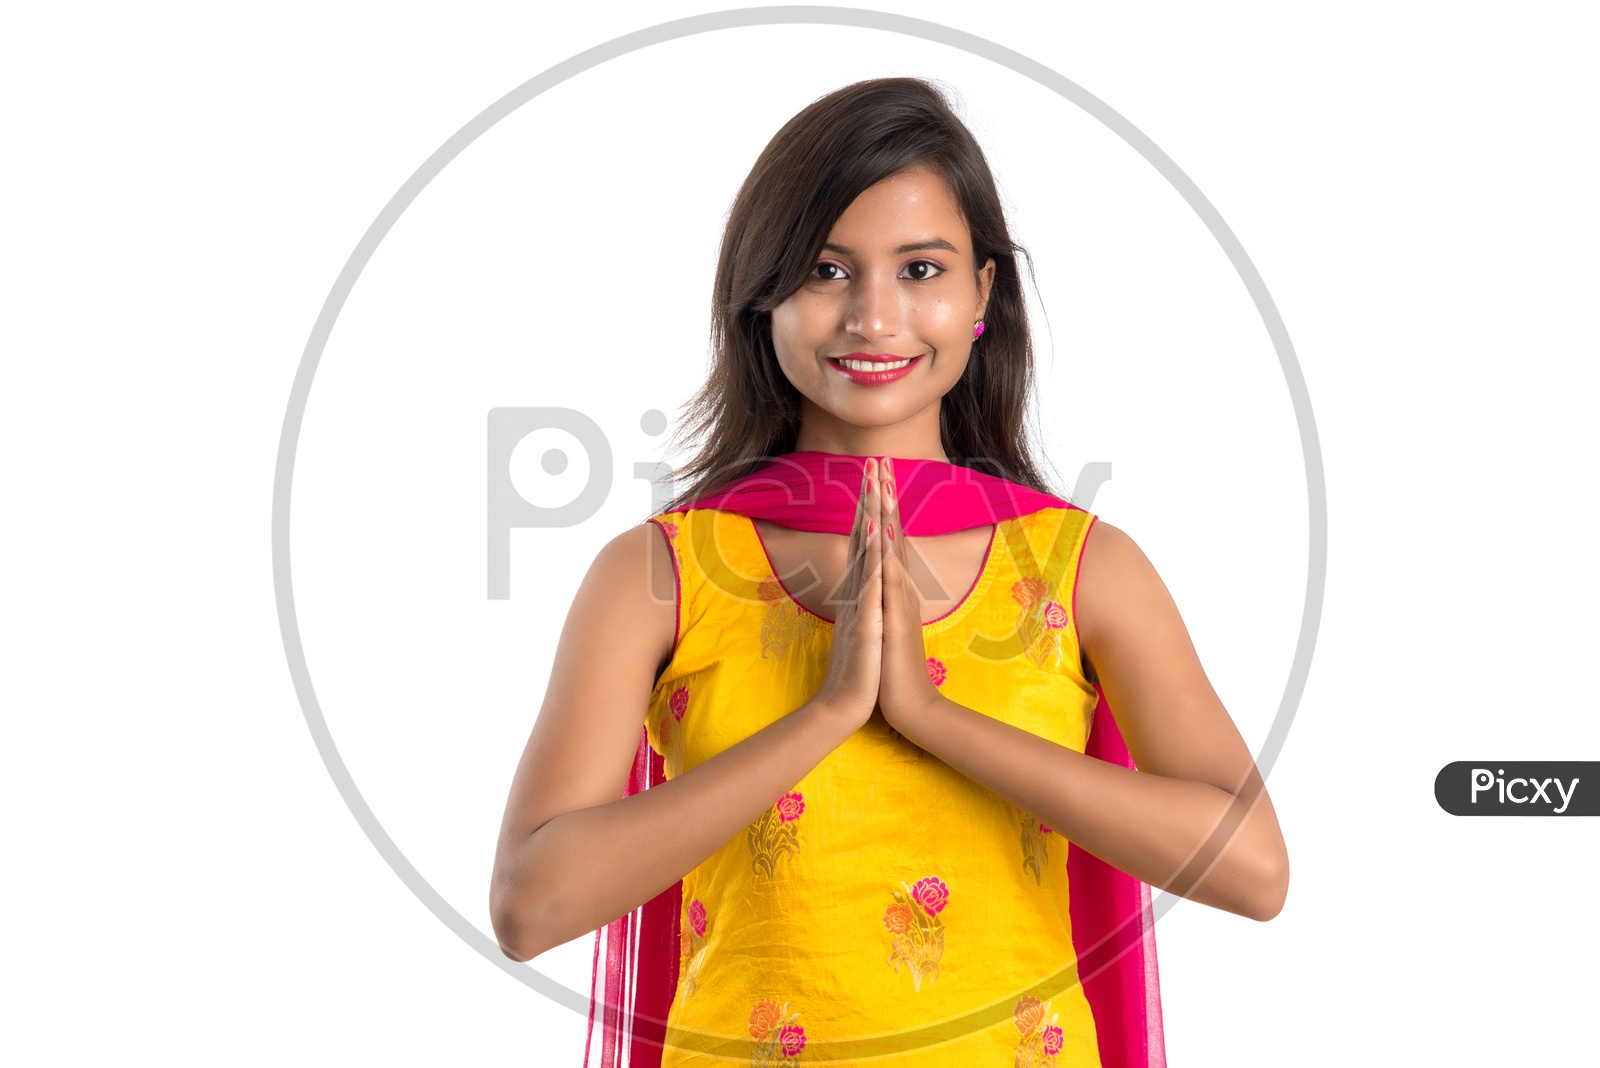 Young Indian Woman or Girl With Smiling Face And Namaste Welcoming  Gestures On an Isolated White Background